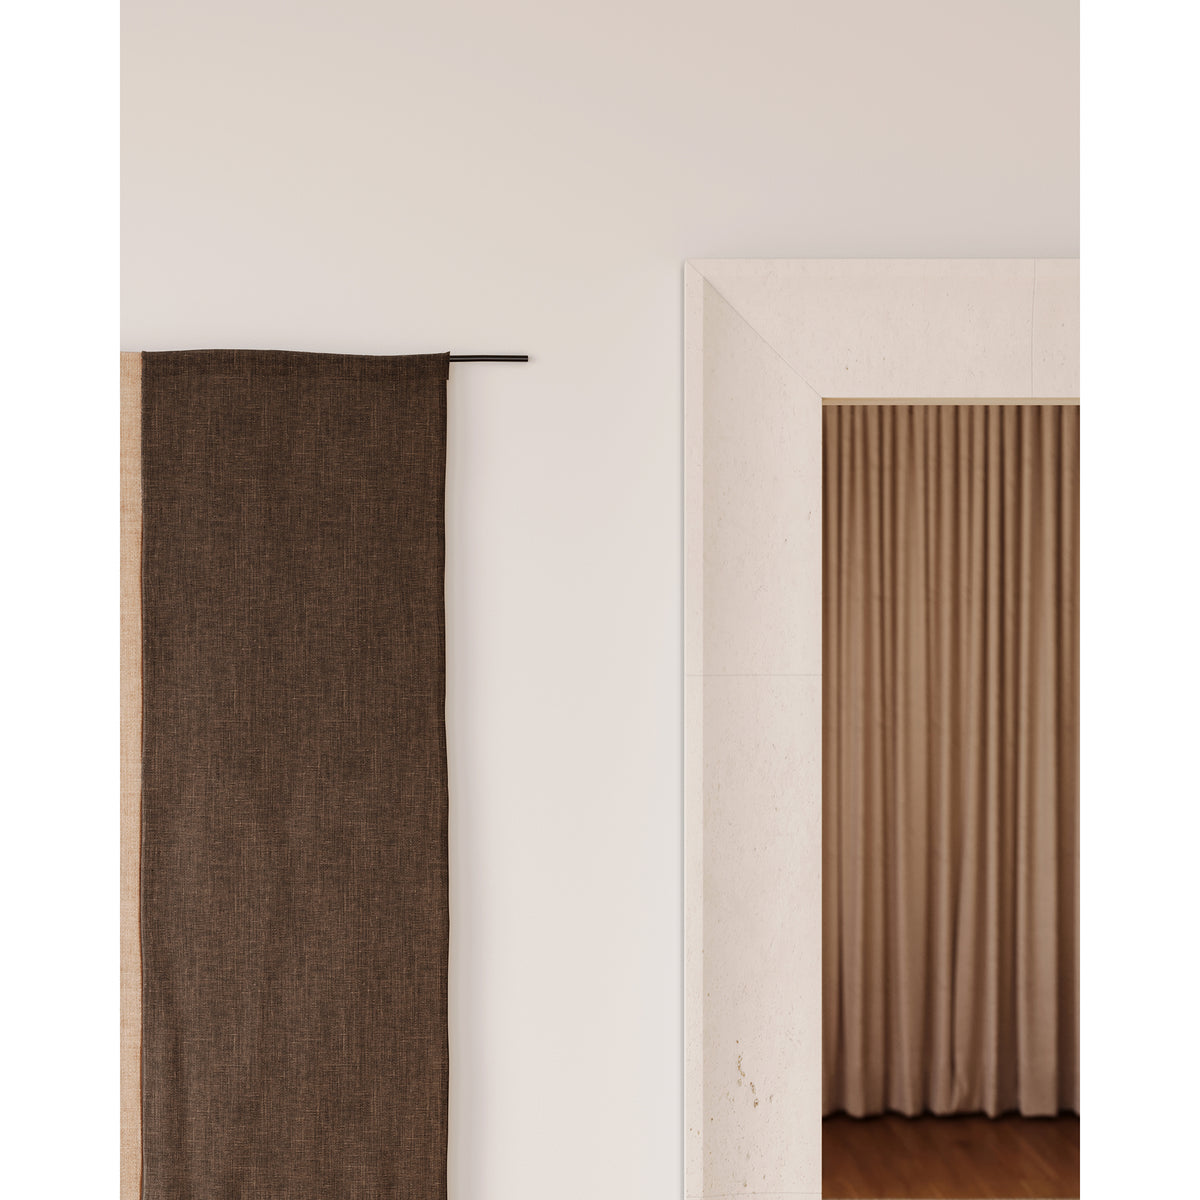 East Coast Door Surround shown in Modern Profile with White Limestone. Main Product Slider View